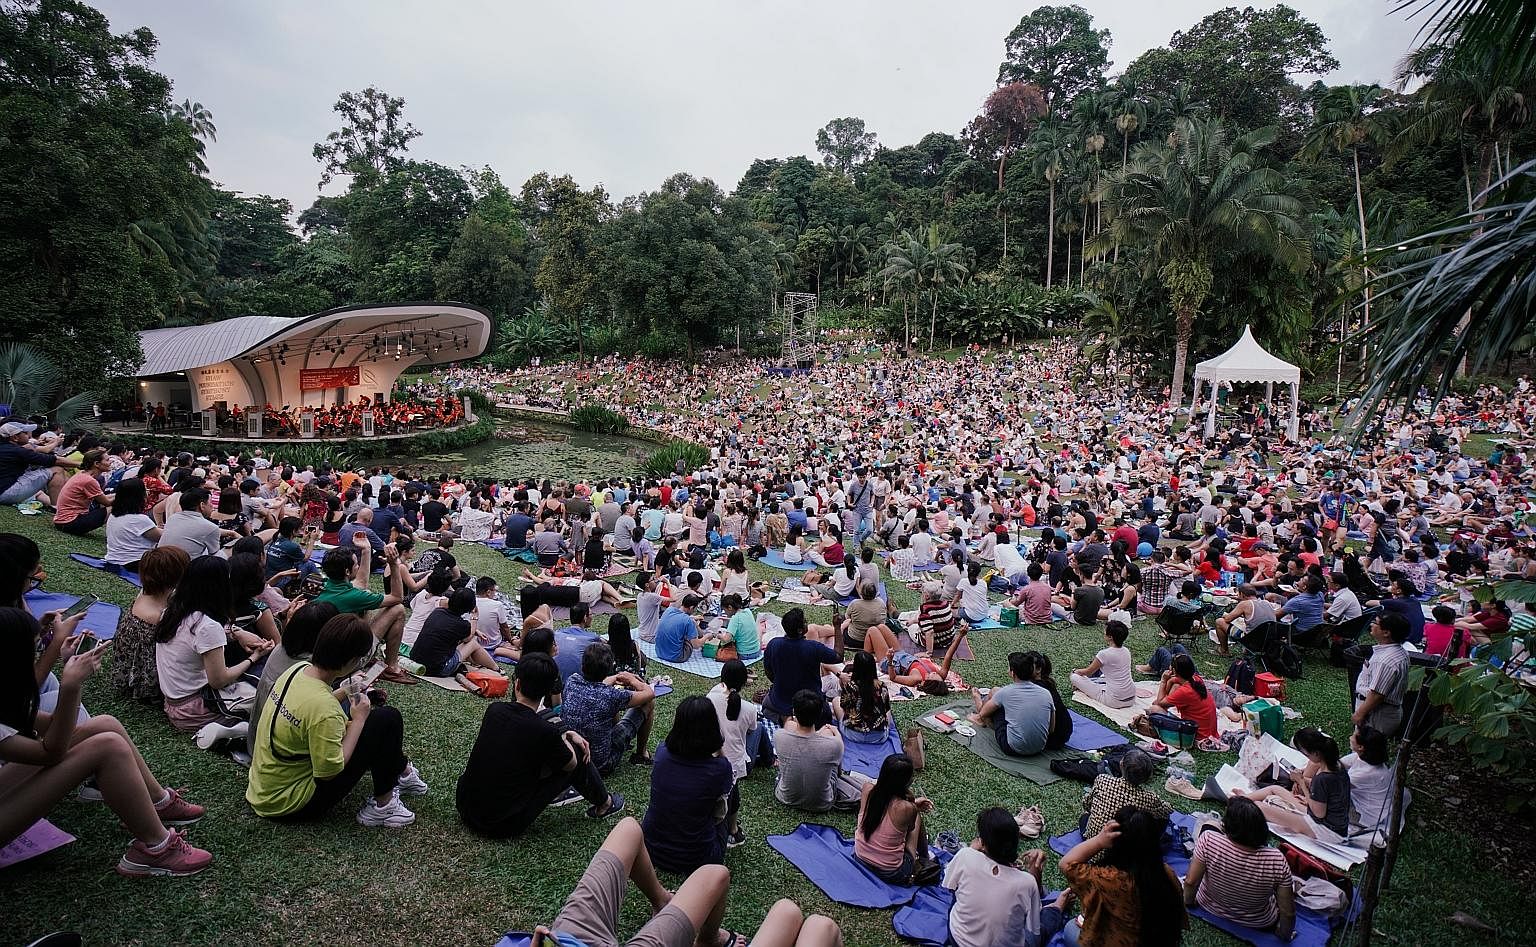 Music filled the air at the Botanic Gardens yesterday as the Singapore Symphony Orchestra (SSO) played to thousands who attended The Straits Times Concert in the Gardens. The SSO, led by associate conductor Joshua Tan, performed a selection of family